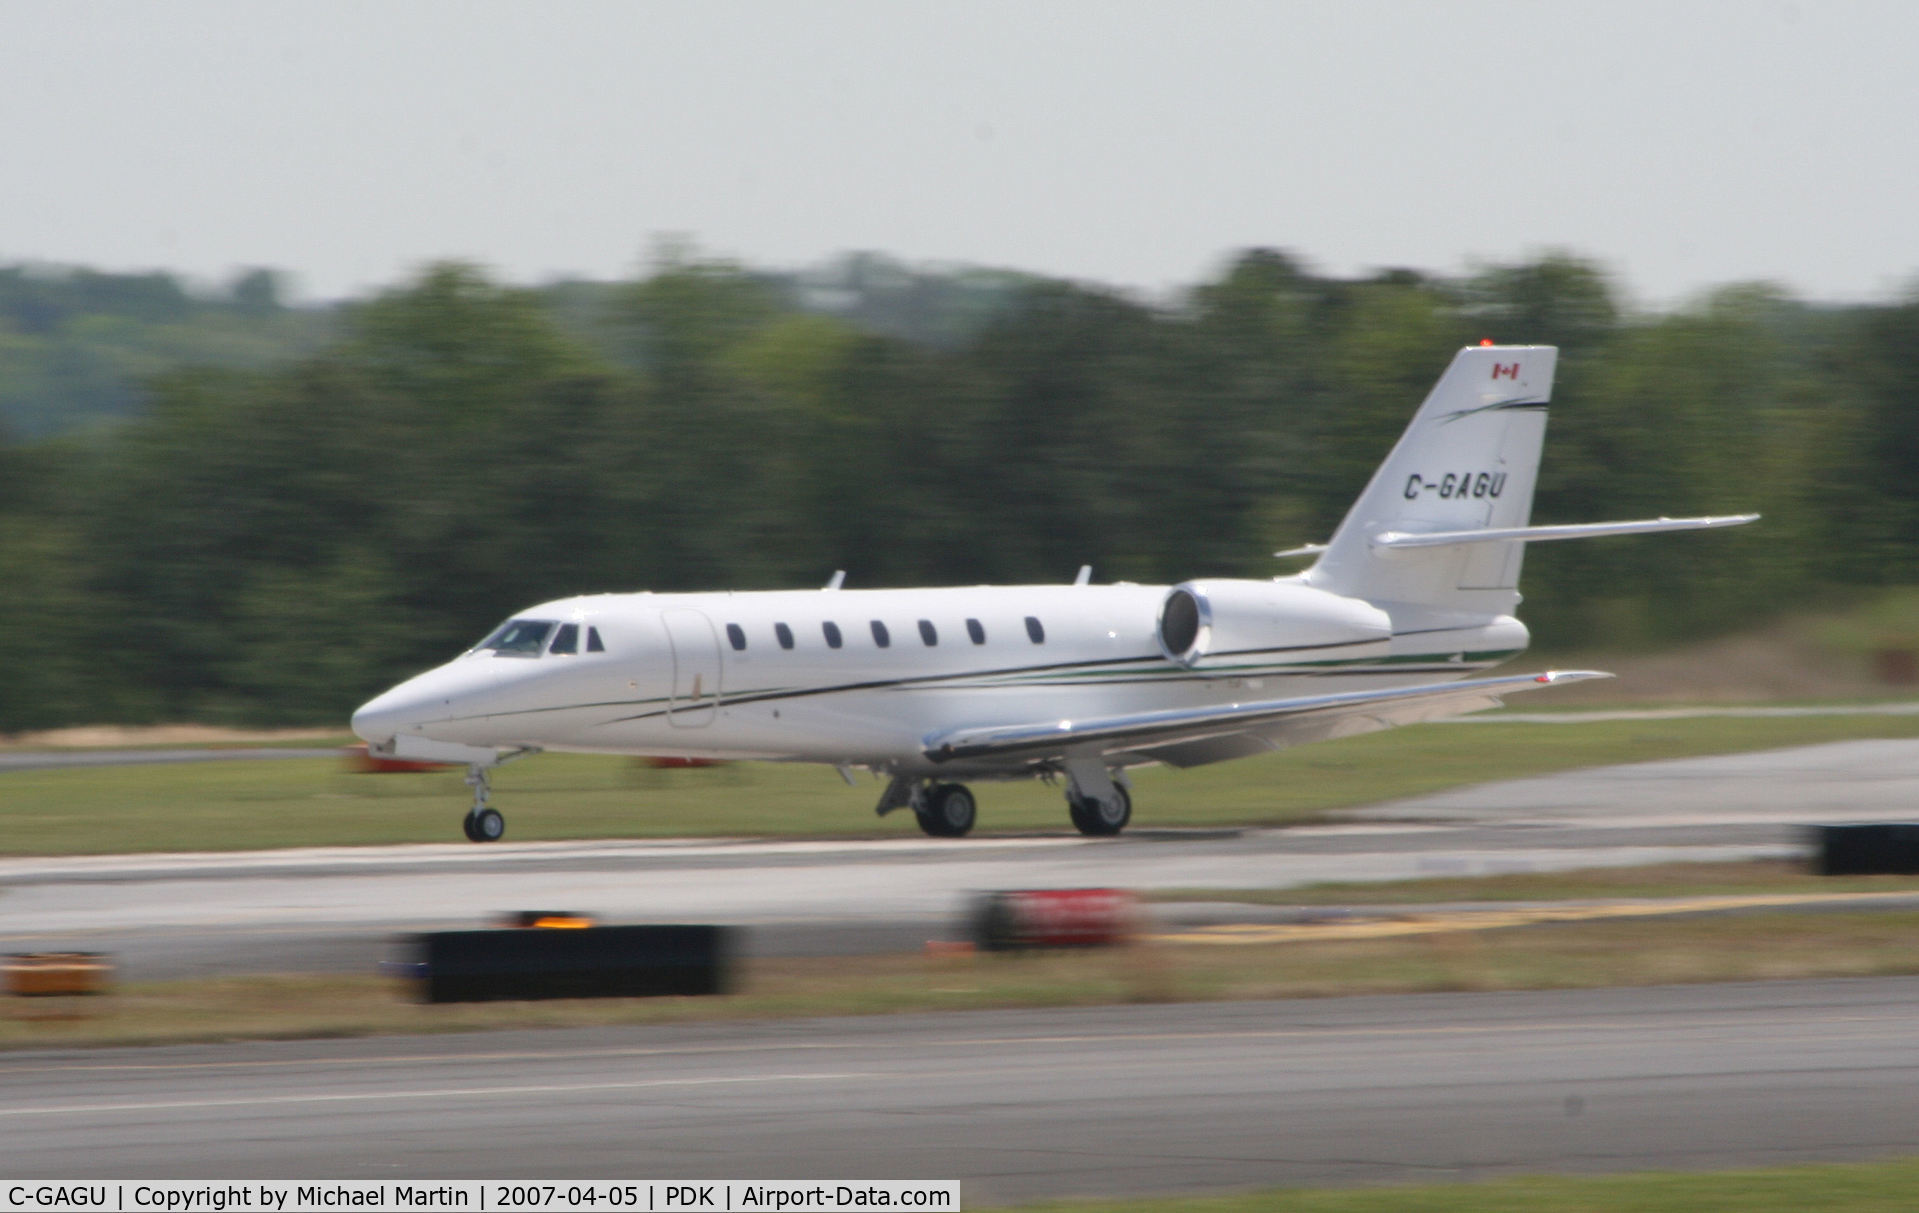 C-GAGU, 2006 Cessna 680 Citation Sovereign C/N 680-0100, Taking off from Runway 2R